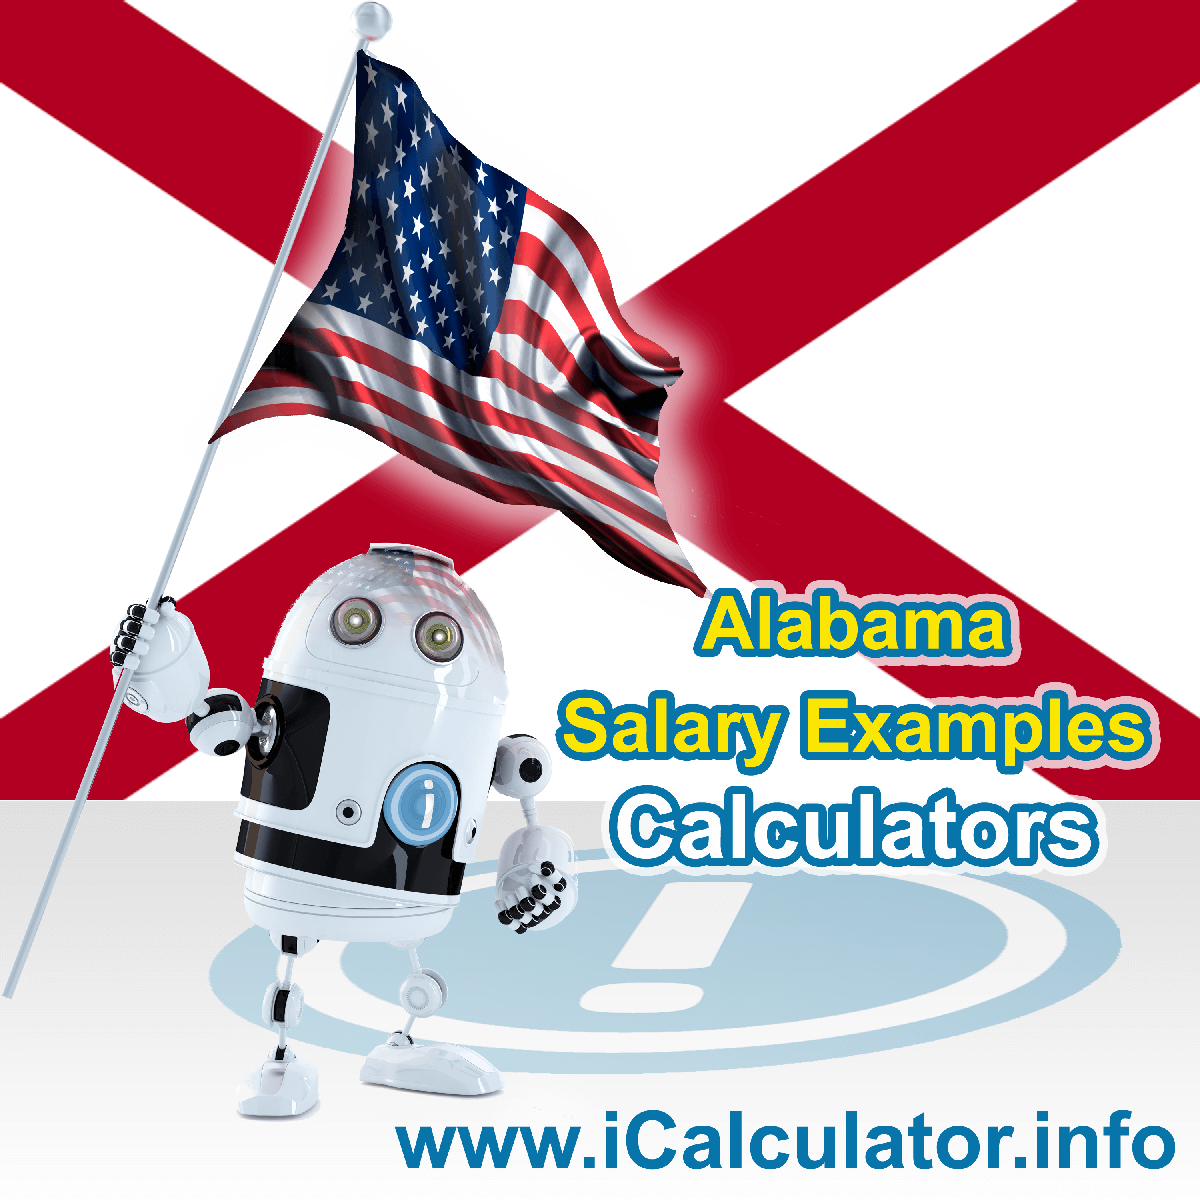 Alabama Salary Example for $ 290,000.00 in 2023 | iCalculator™ | $ 290,000.00 salary example for employee and employer paying Alabama State tincome taxes. Detailed salary after tax calculation including Alabama State Tax, Federal State Tax, Medicare Deductions, Social Security, Capital Gains and other income tax and salary deductions complete with supporting Alabama state tax tables 